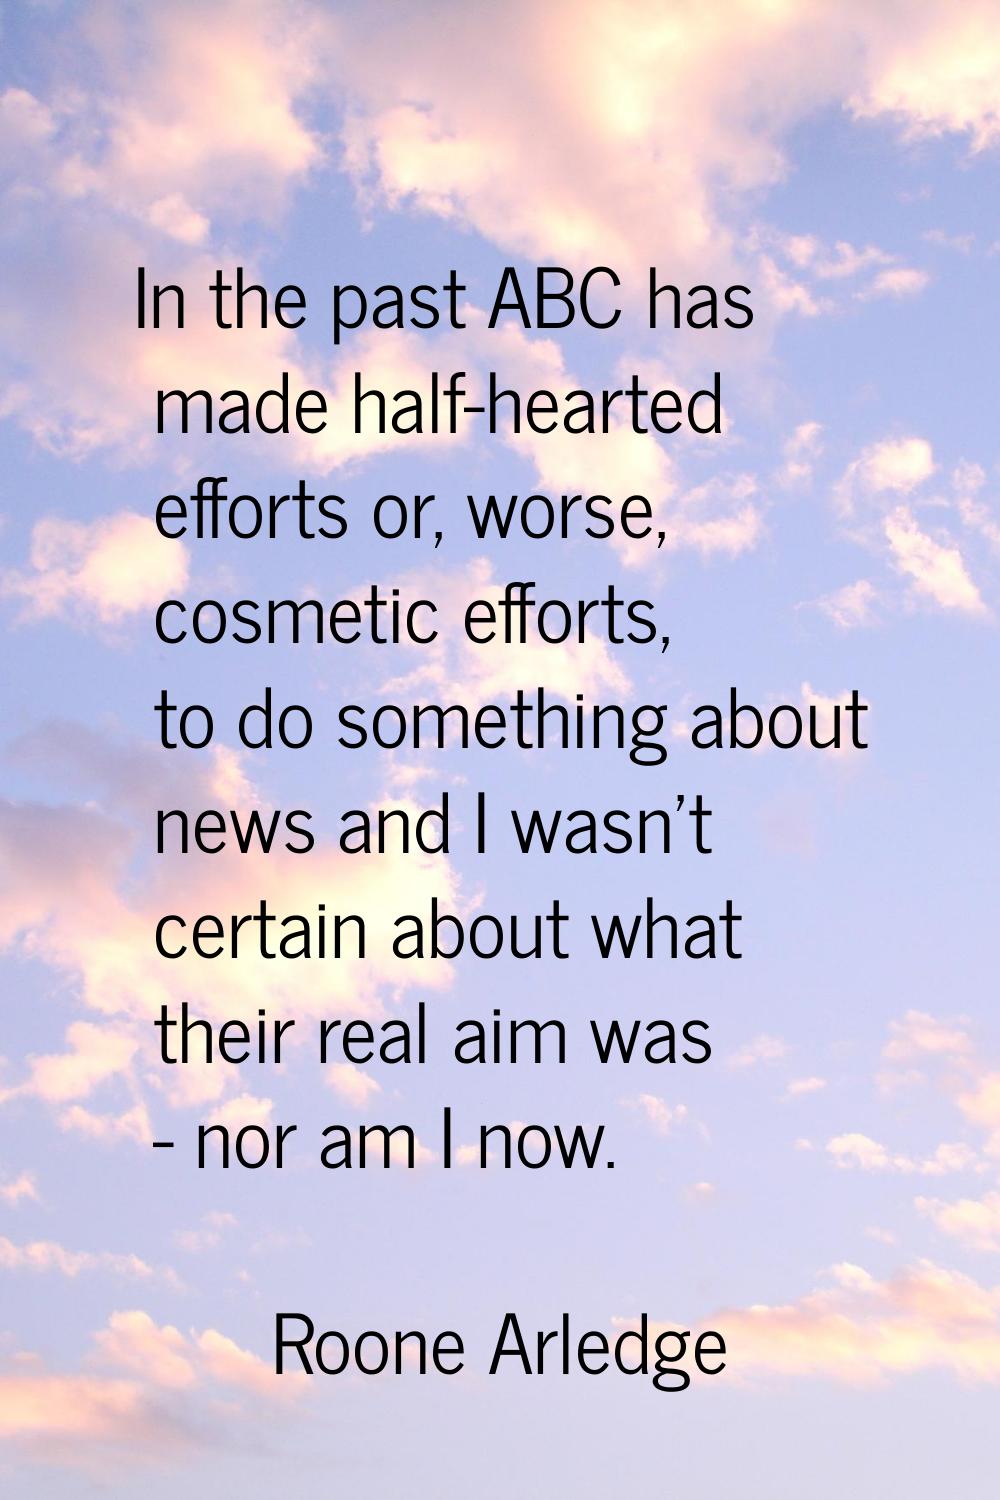 In the past ABC has made half-hearted efforts or, worse, cosmetic efforts, to do something about ne